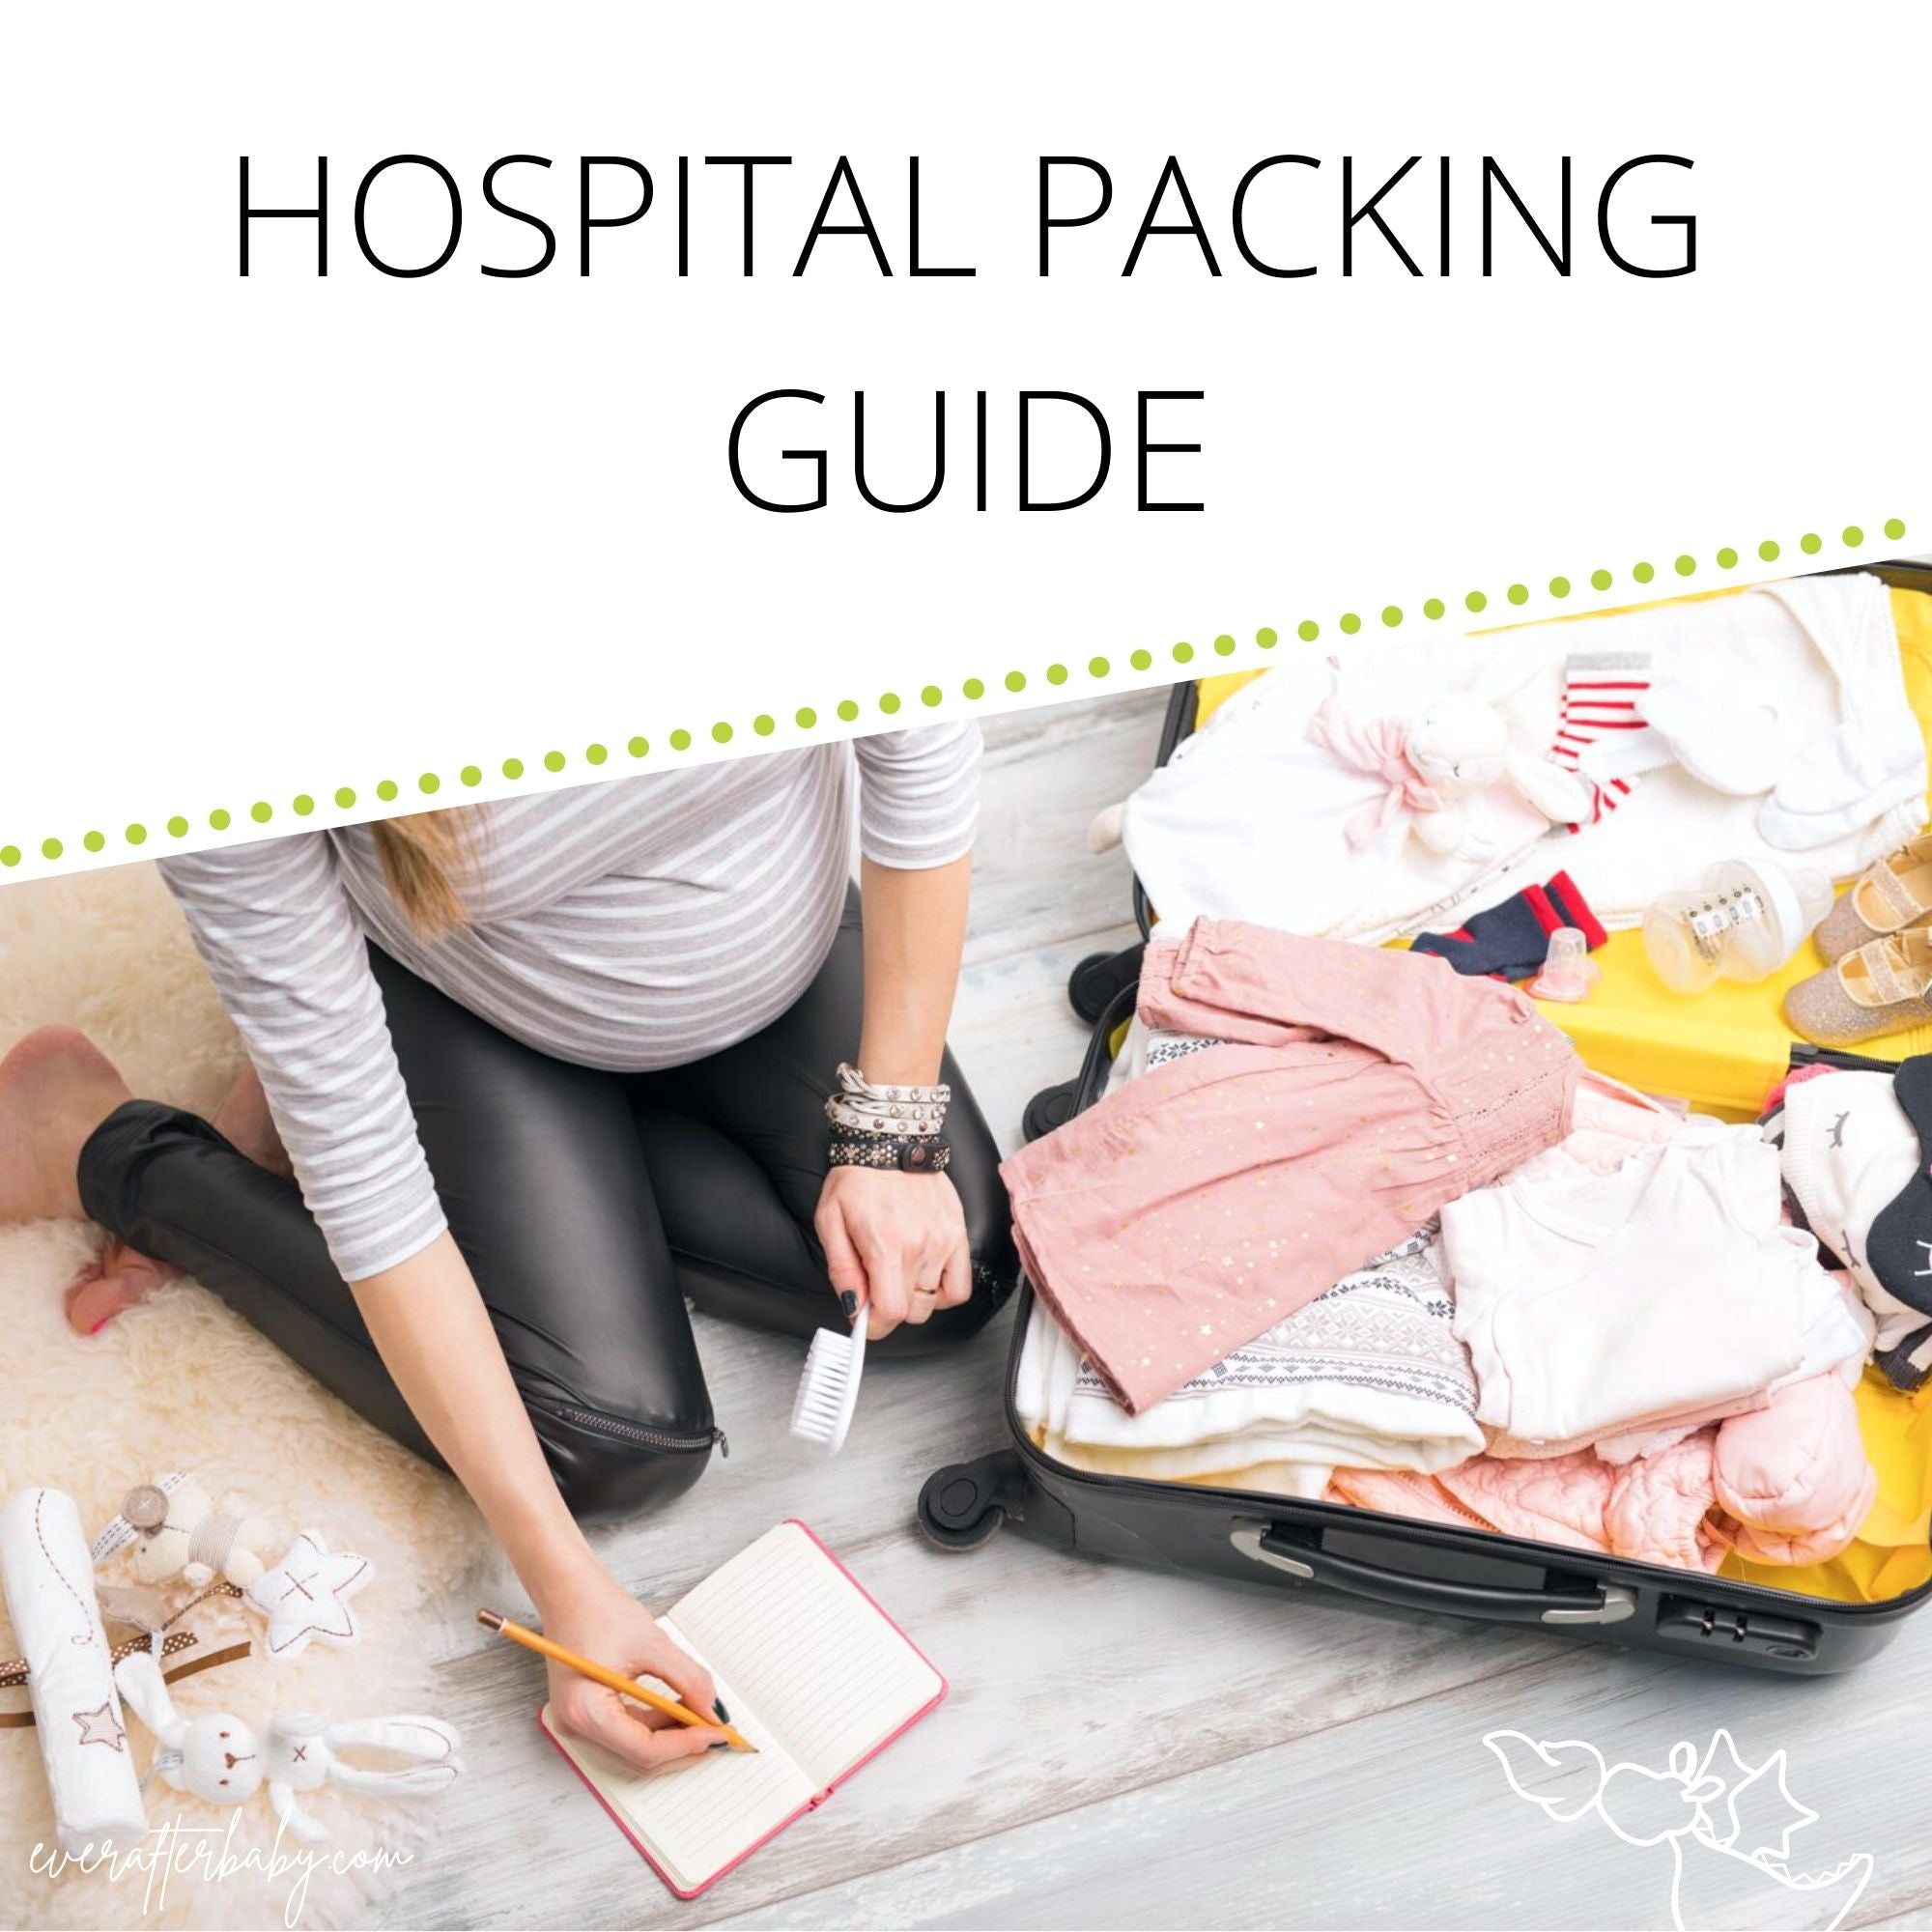 The Essentials to Pack for the Hospital